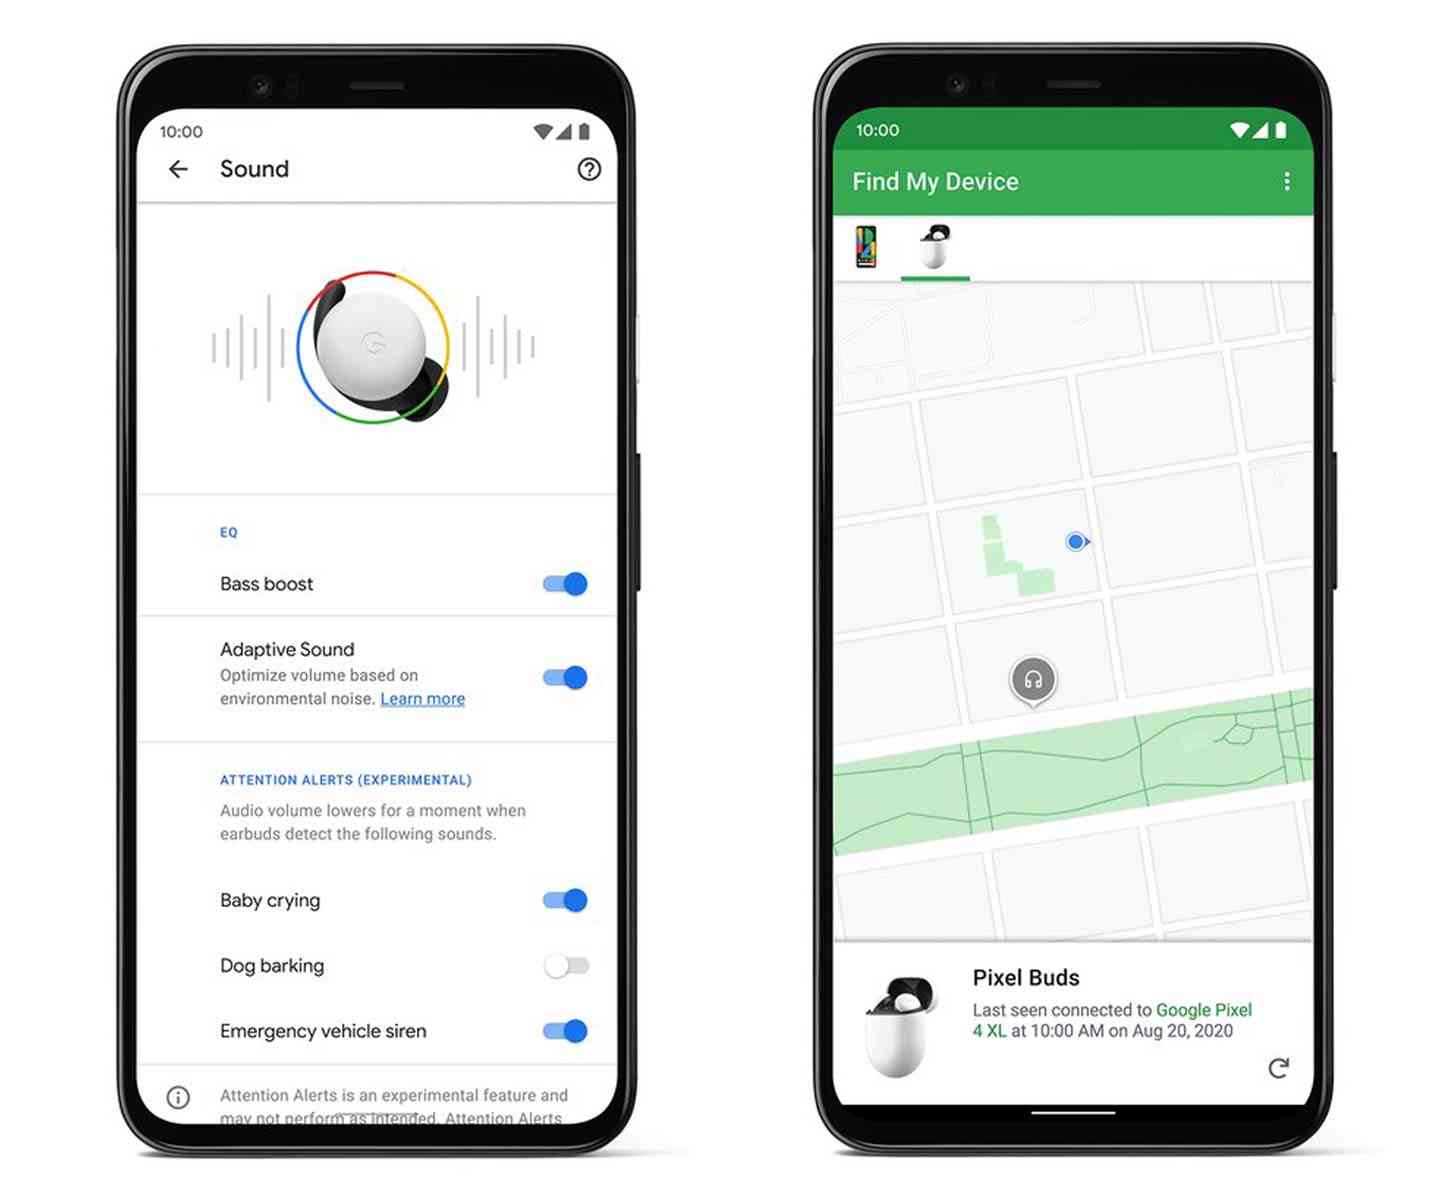 Pixel Buds Attention Alerts, Find my Device